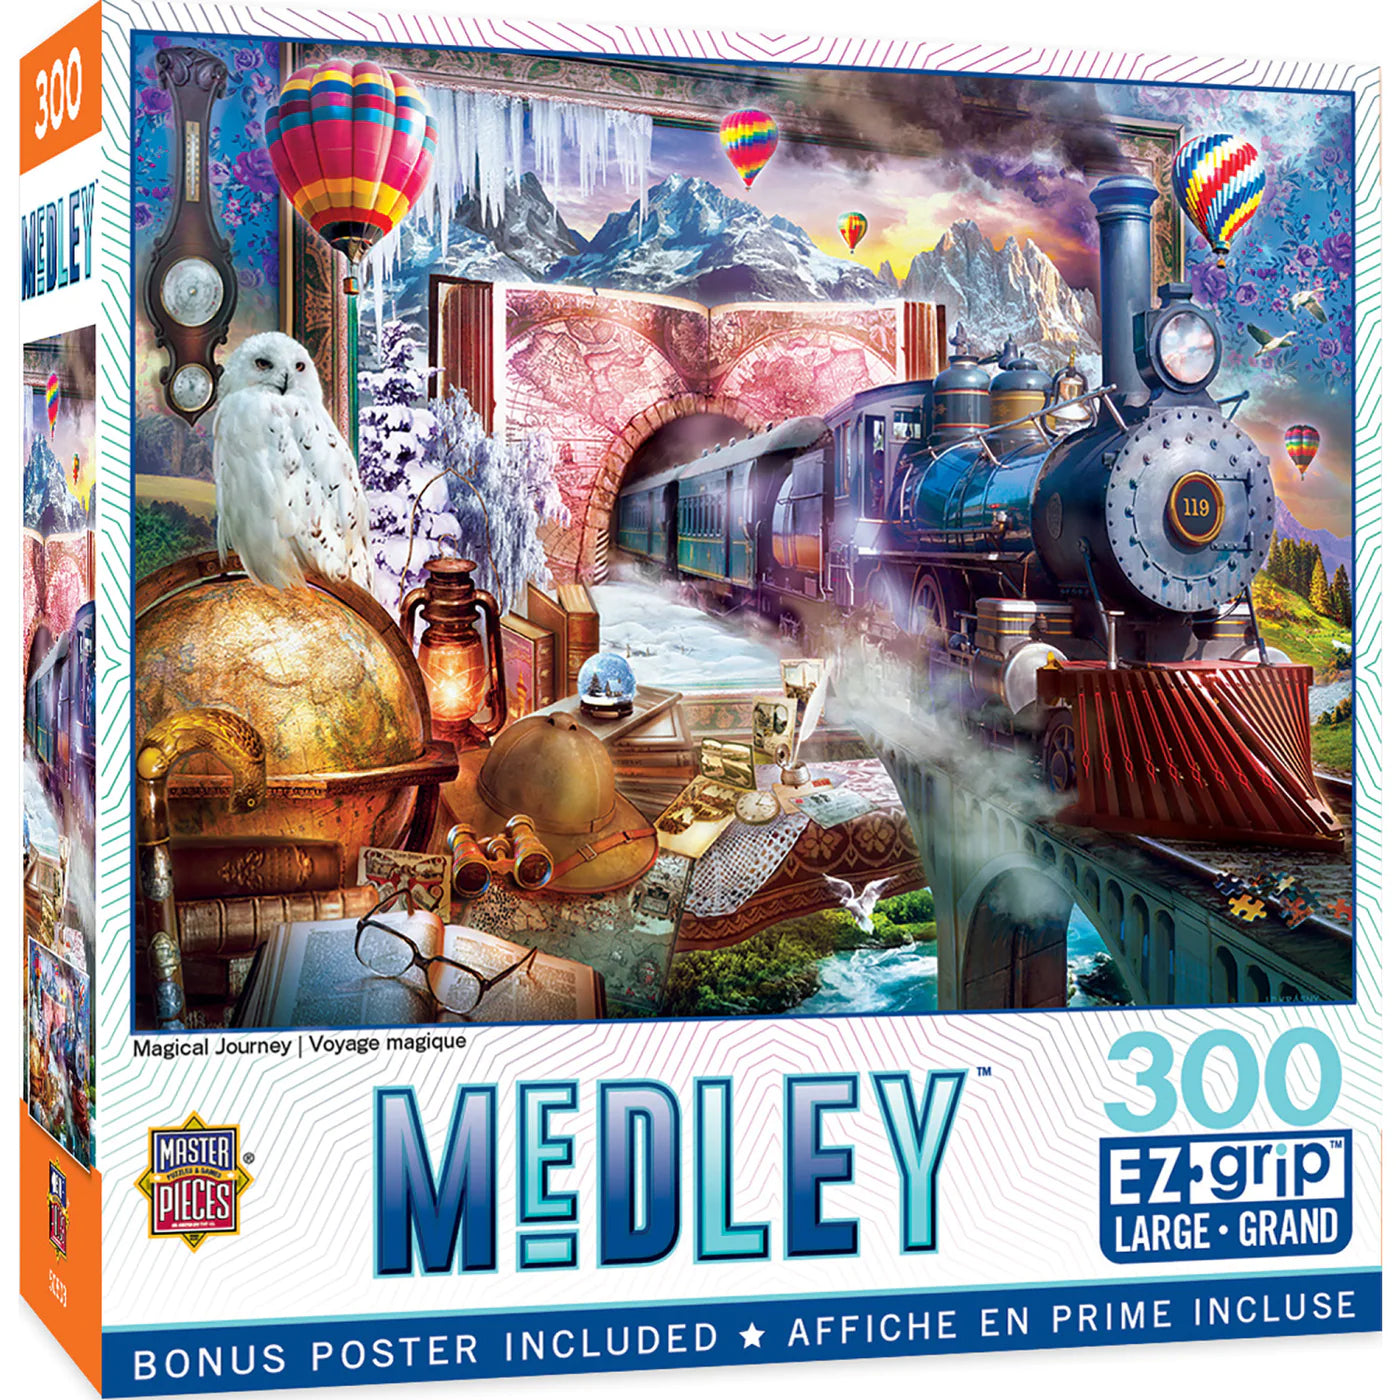 Medley - Magical Journey 300 Piece Jigsaw Puzzle by Masterpieces